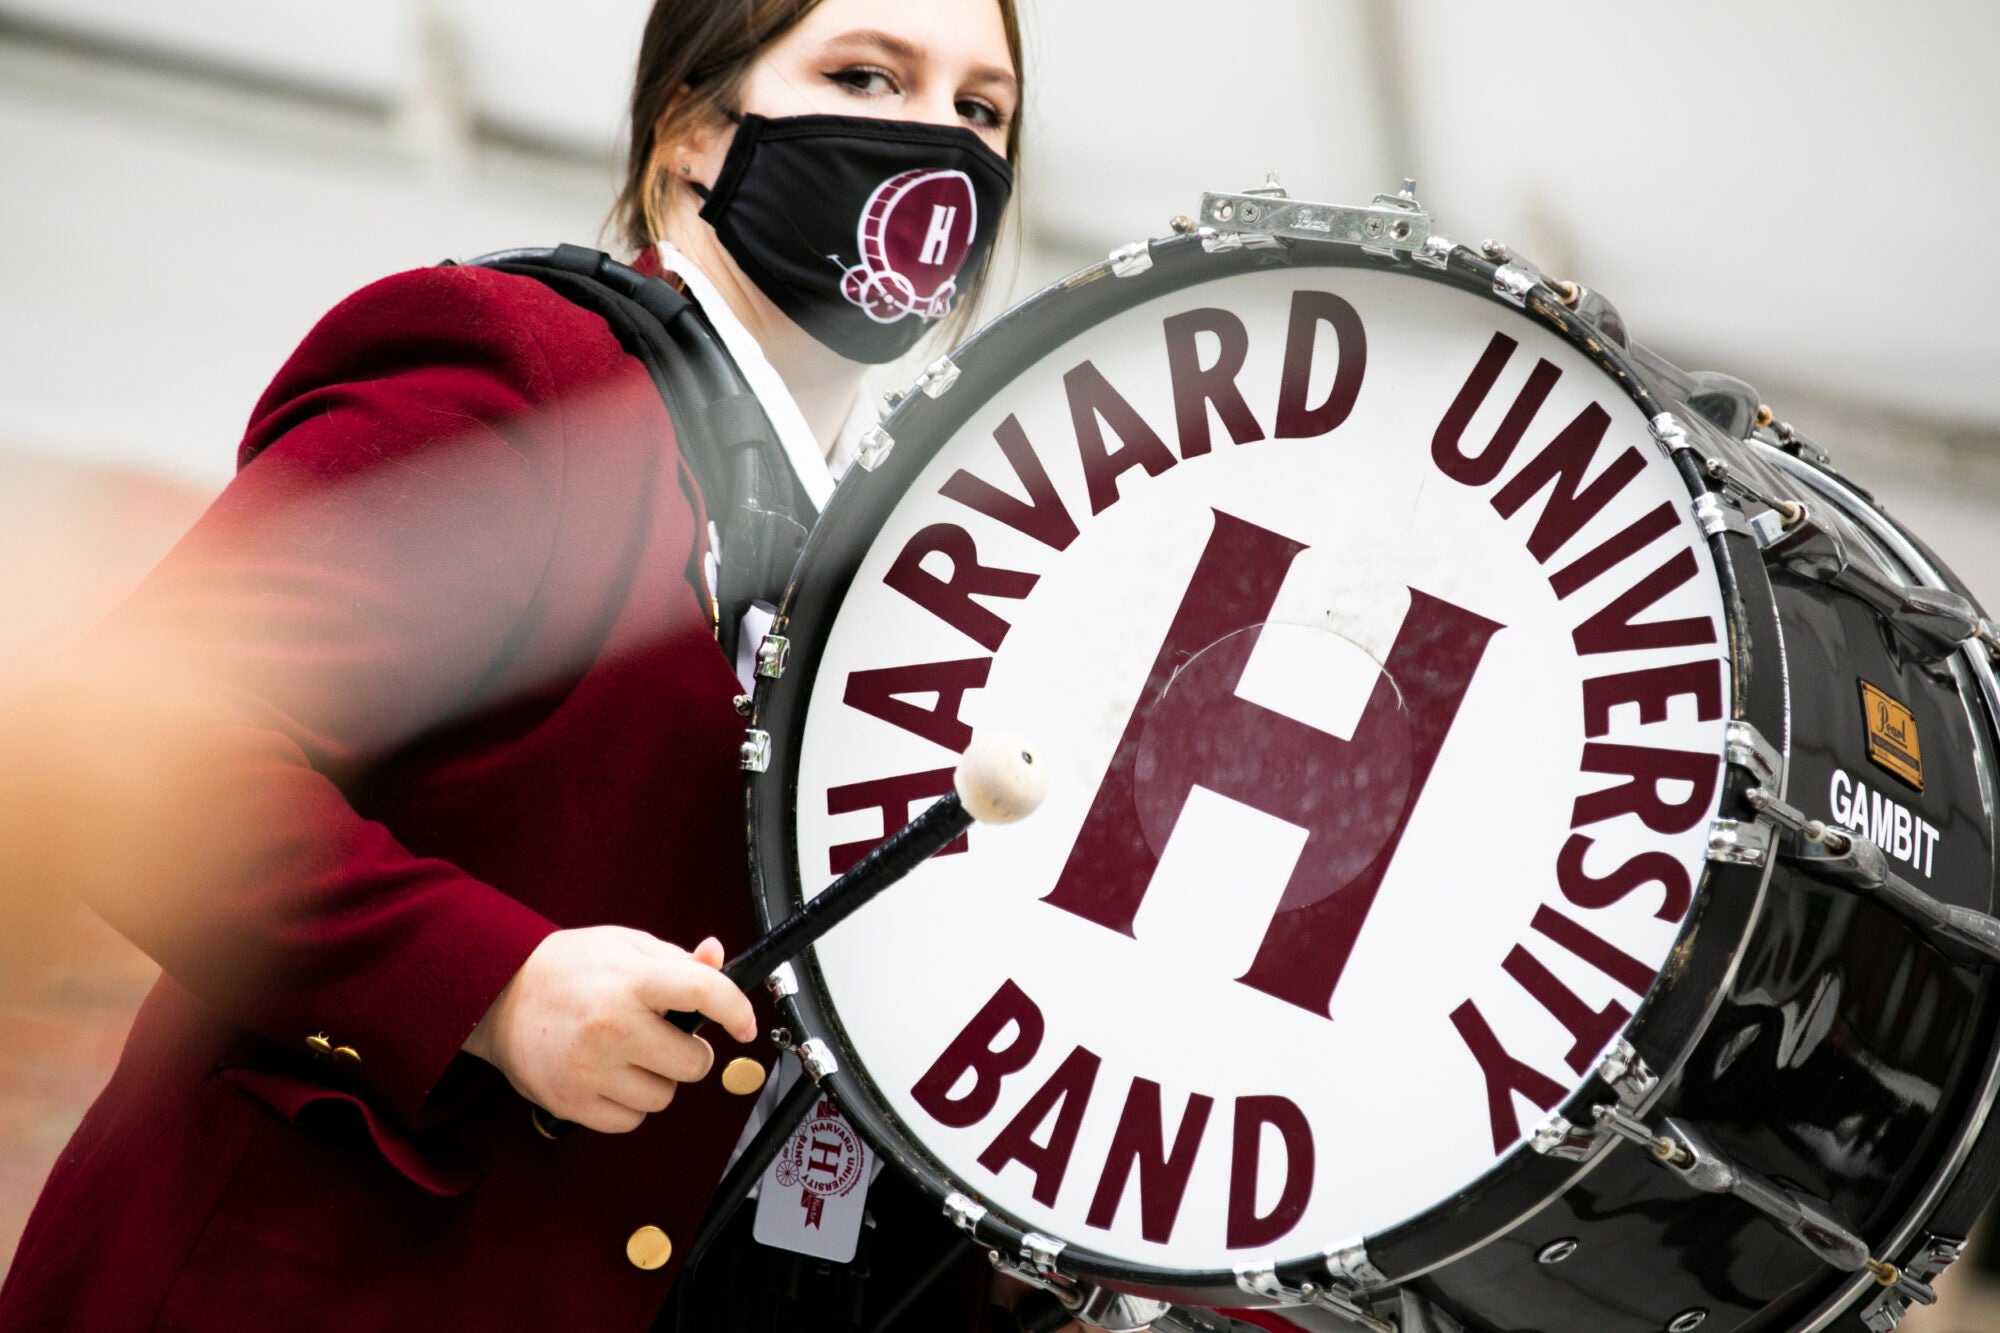 A member of the Harvard band plays the drums